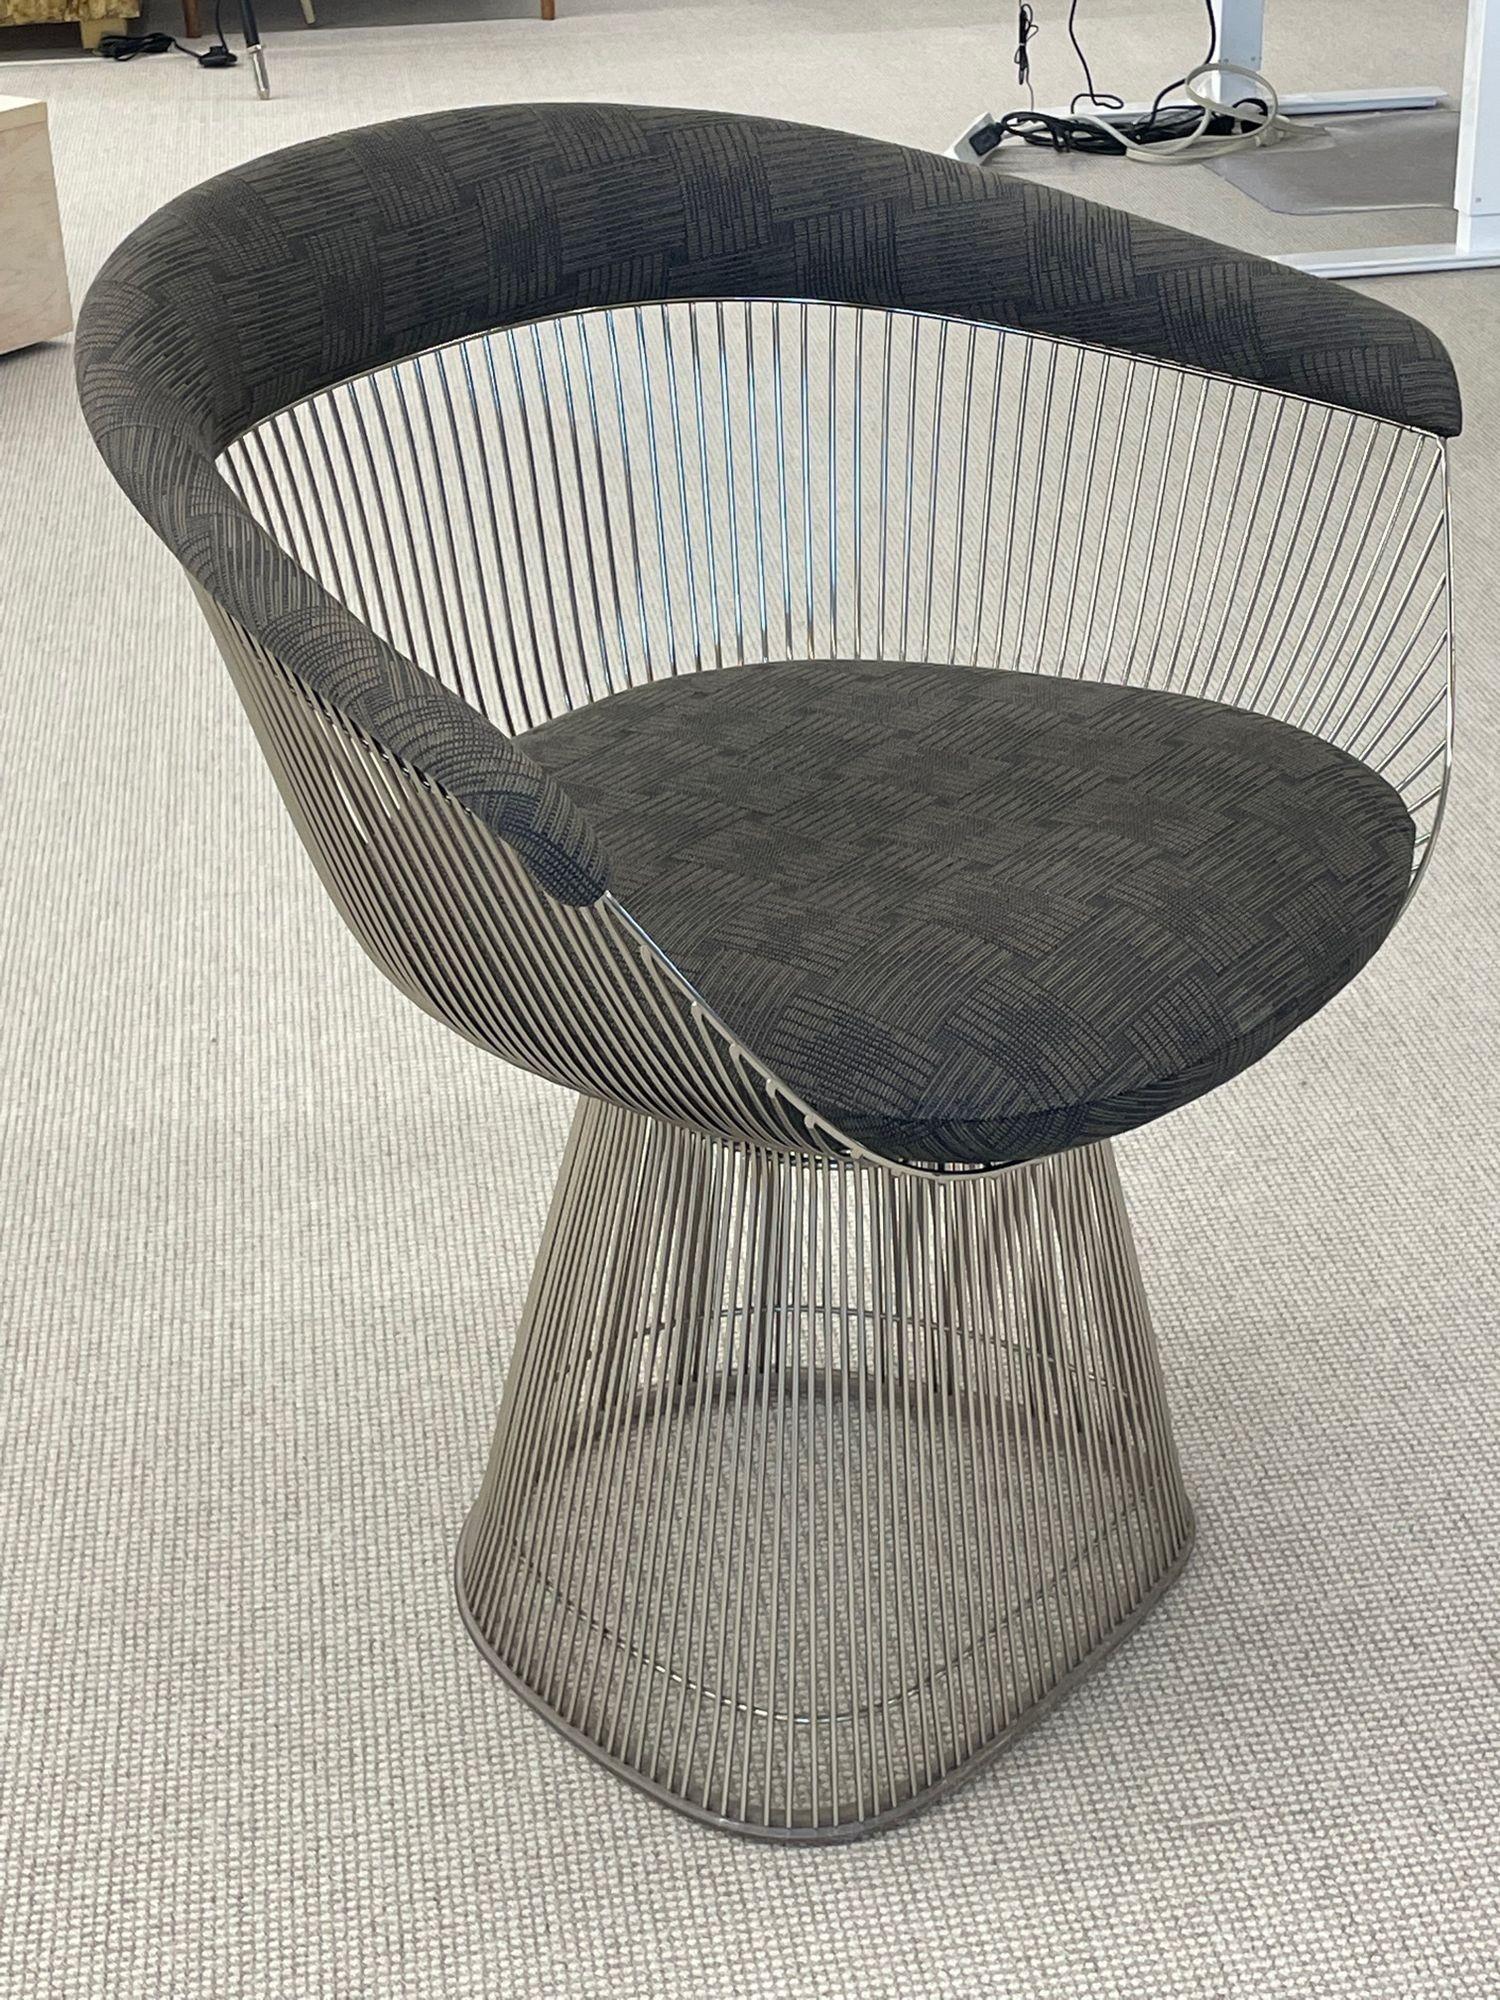 Fabric Vintage Pair of Warren Platner for Knoll Arm / Lounge Chairs, Signed, American